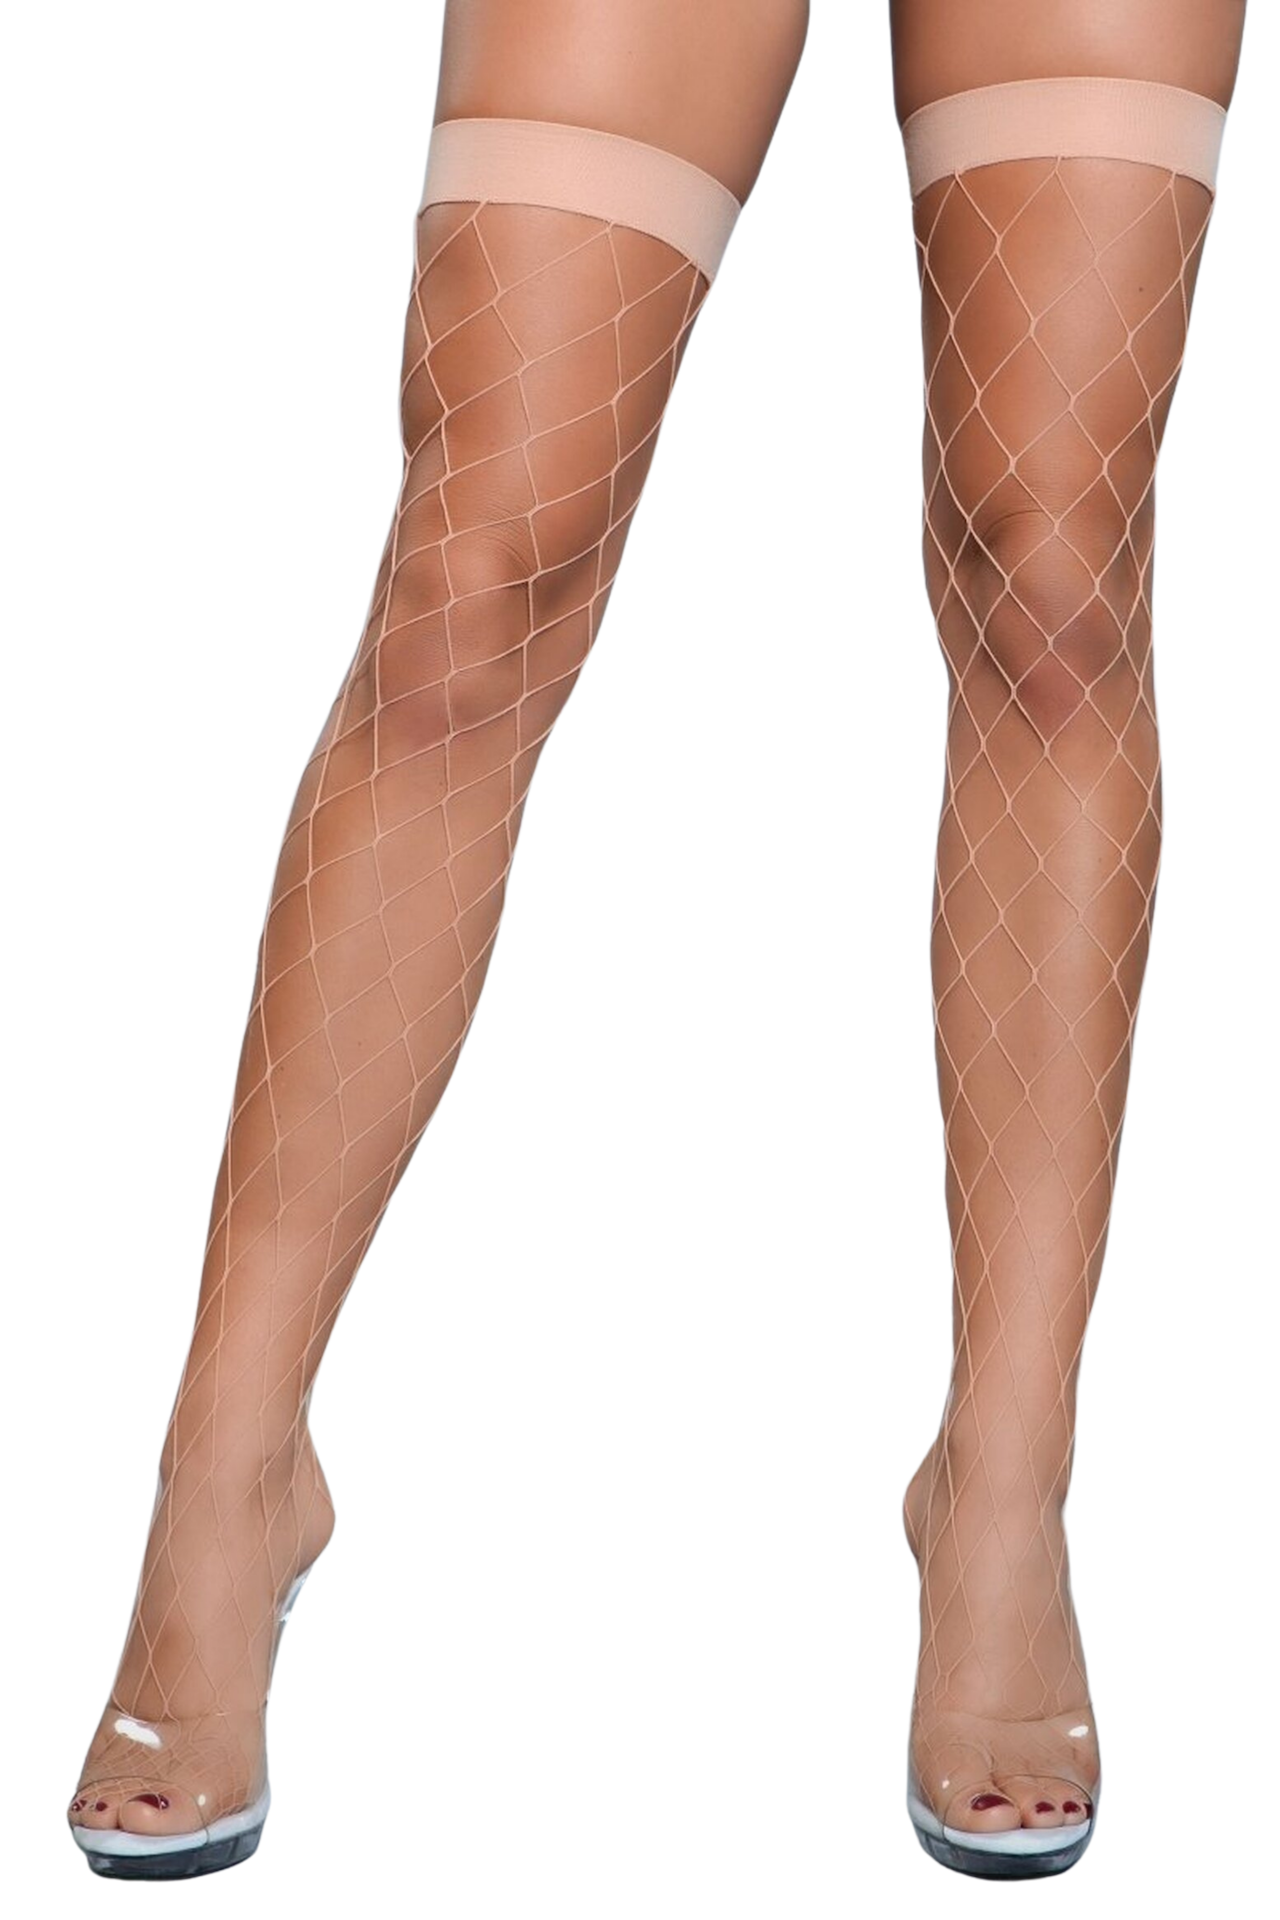 Thigh High Stockings - For Love of Lingerie